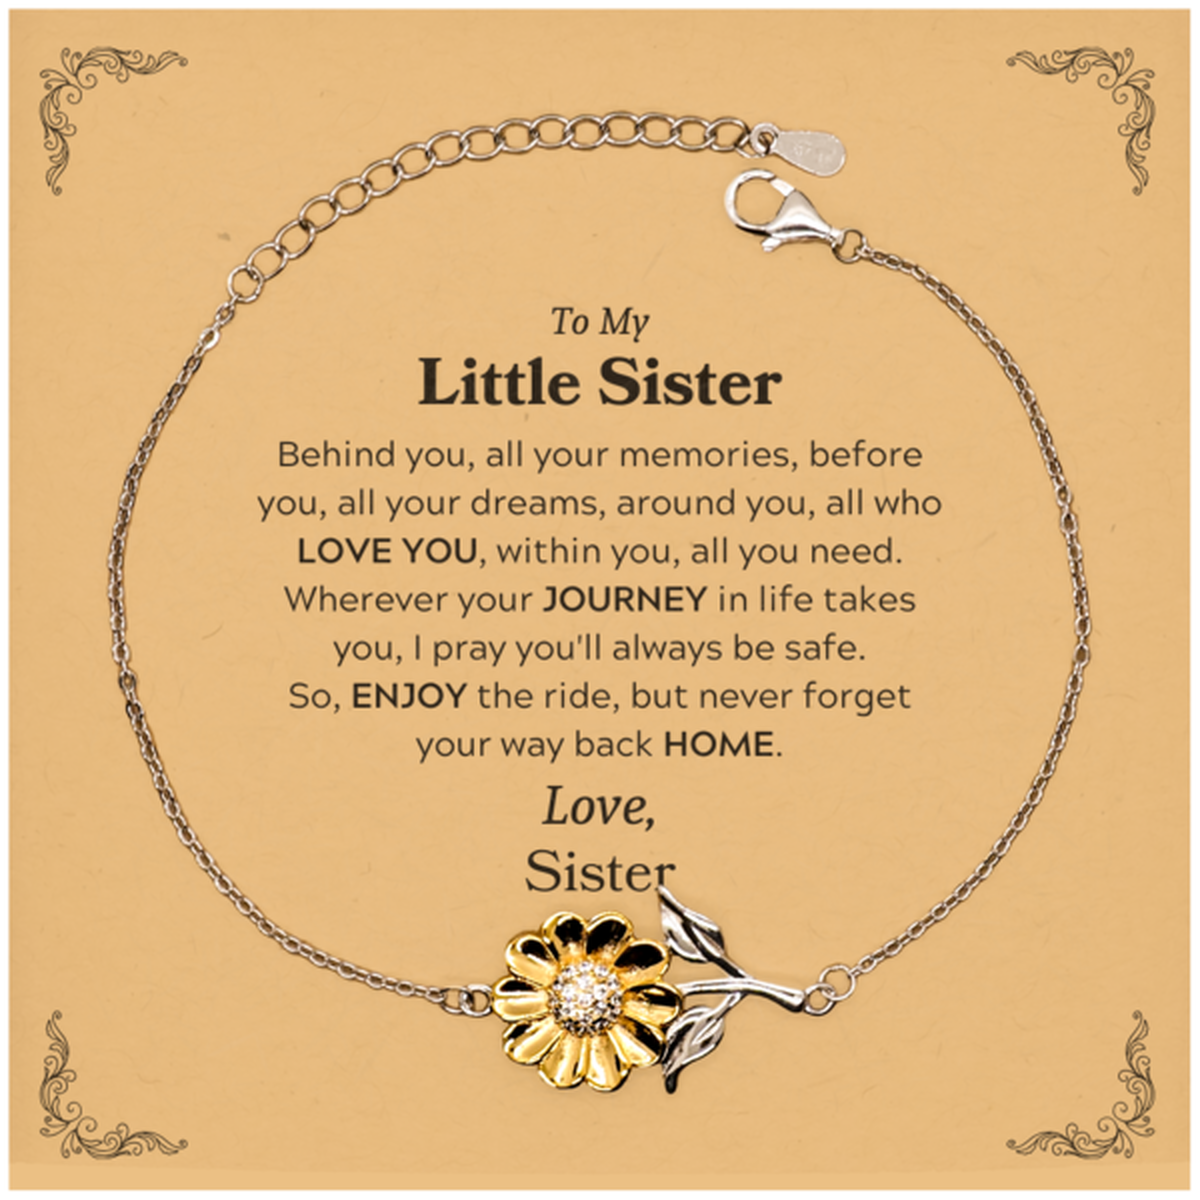 To My Little Sister Graduation Gifts from Sister, Little Sister Sunflower Bracelet Christmas Birthday Gifts for Little Sister Behind you, all your memories, before you, all your dreams. Love, Sister